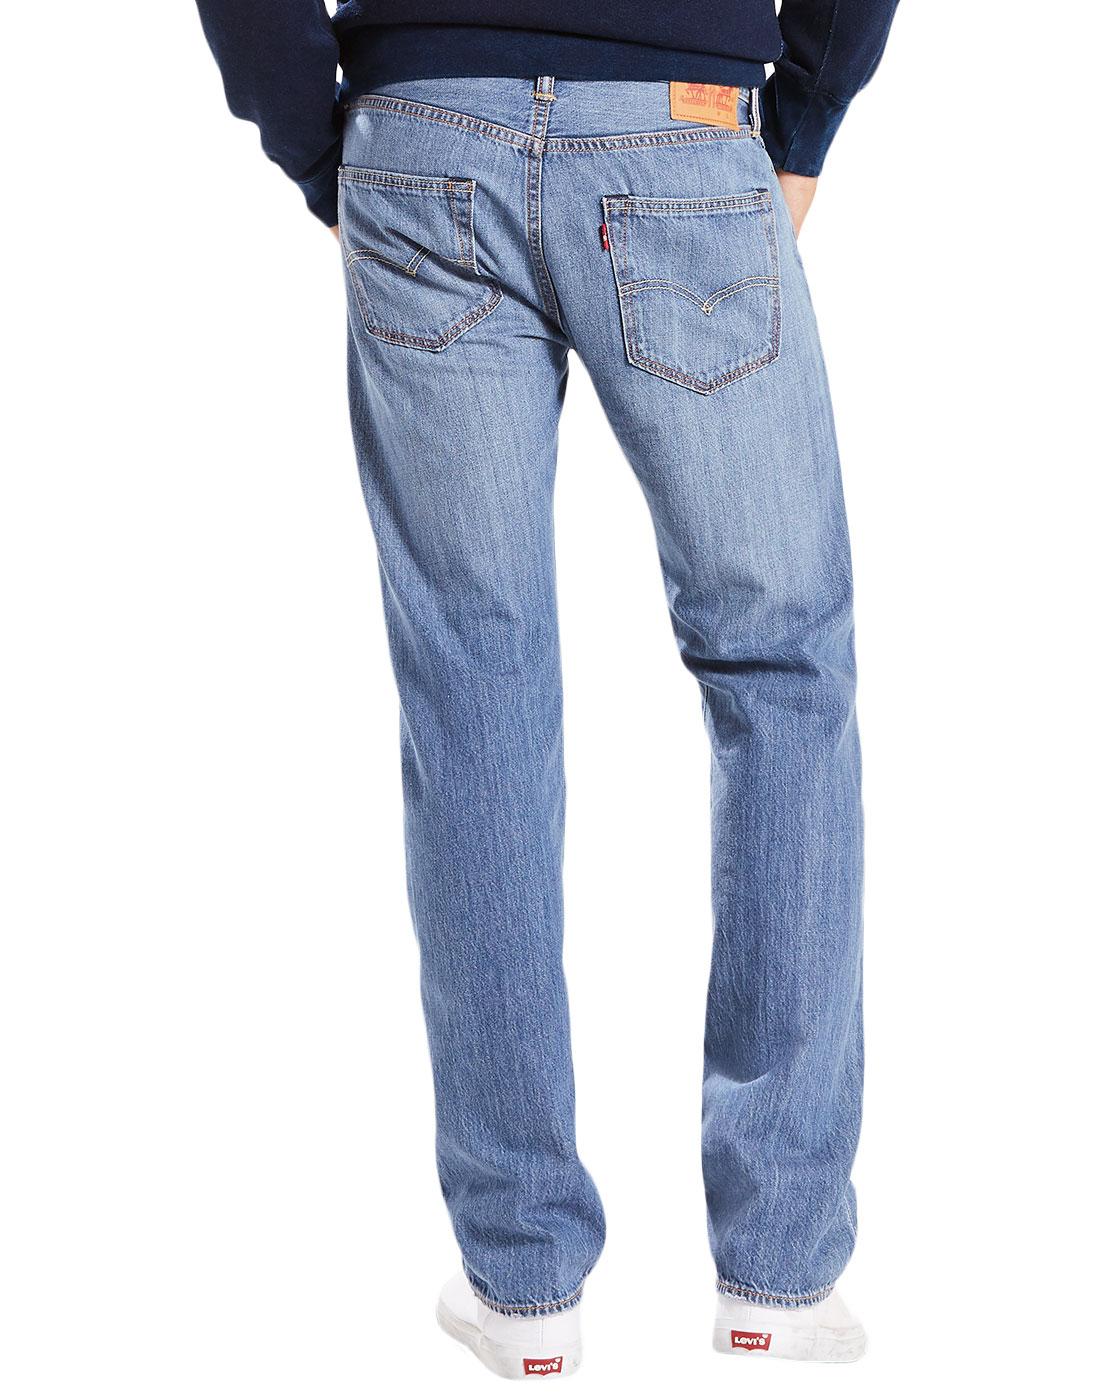 LEVI'S 501 Mod Original Straight Jeans in Rocky Road Cool